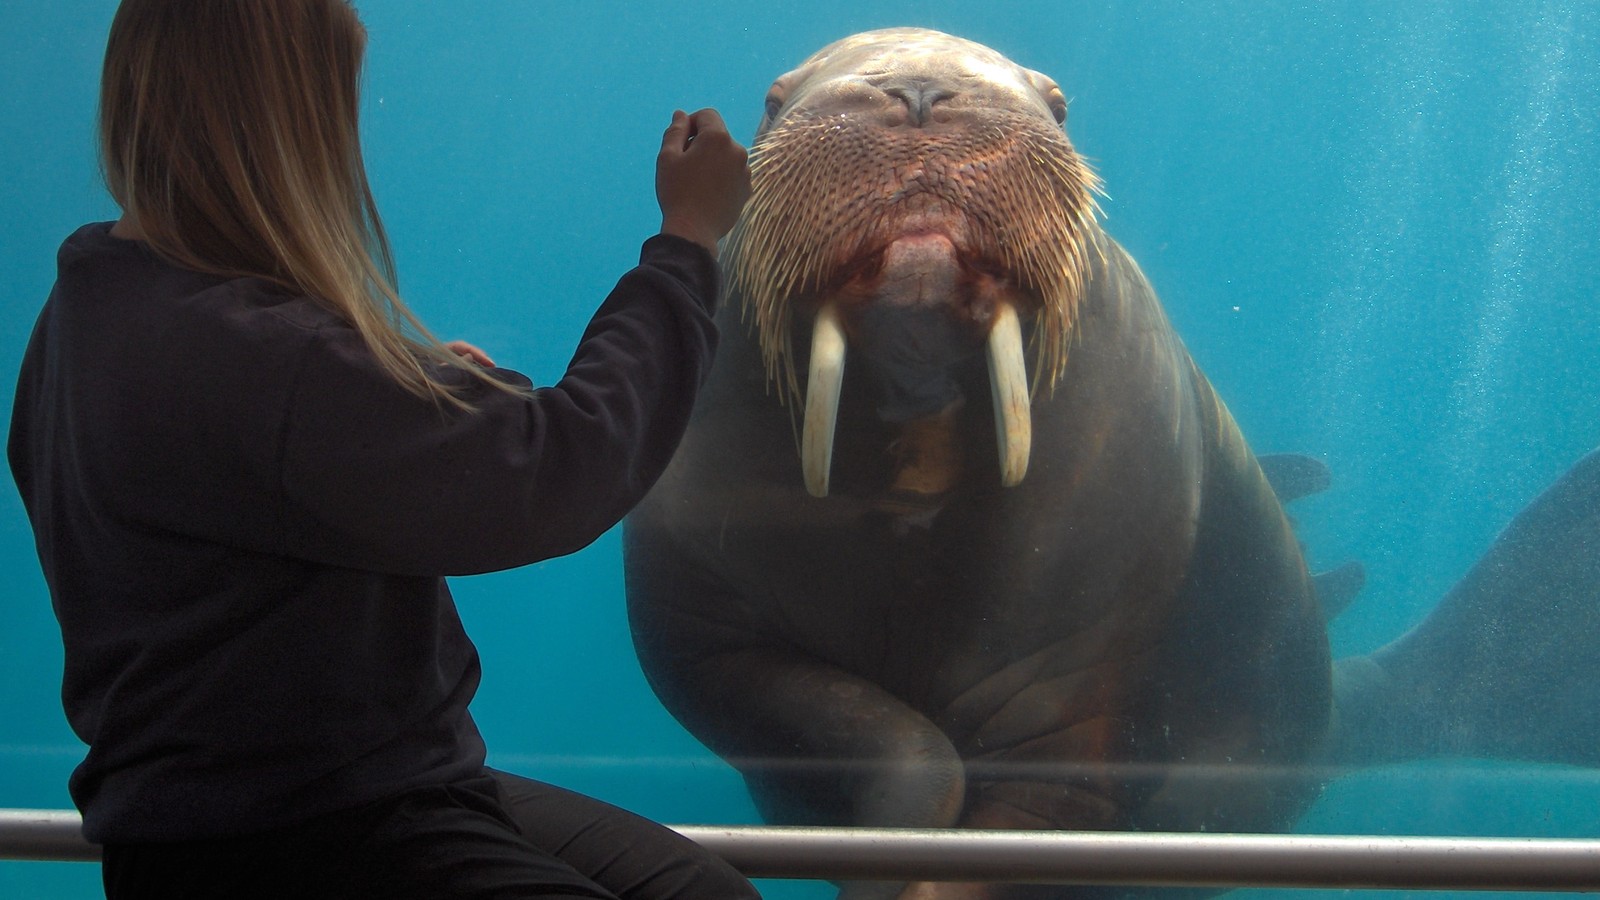 One Mighty Walrus Clapped for Love Very, Very Loudly - The Atlantic